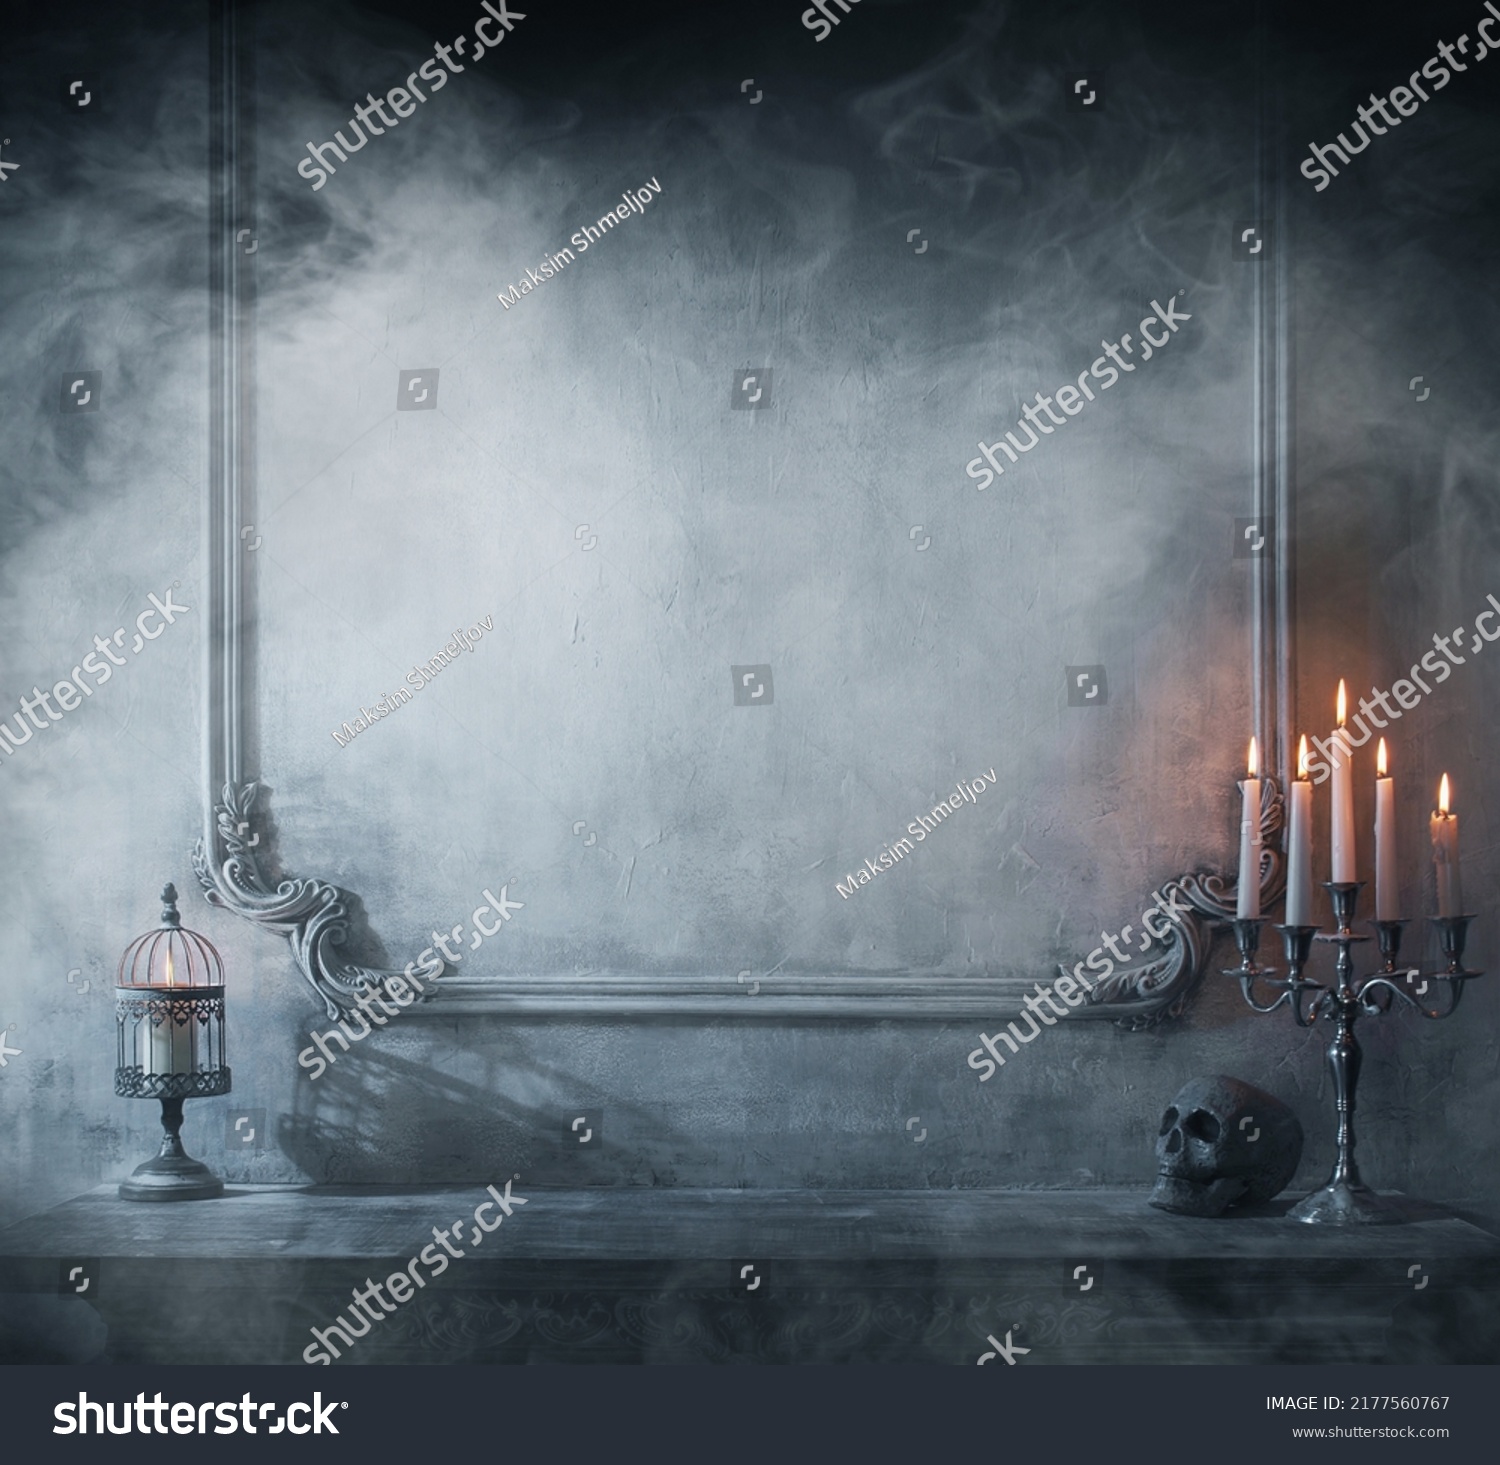 Mystical Halloween still-life background. Skull, candlestick with candles, old fireplace. Horror and witchery. #2177560767